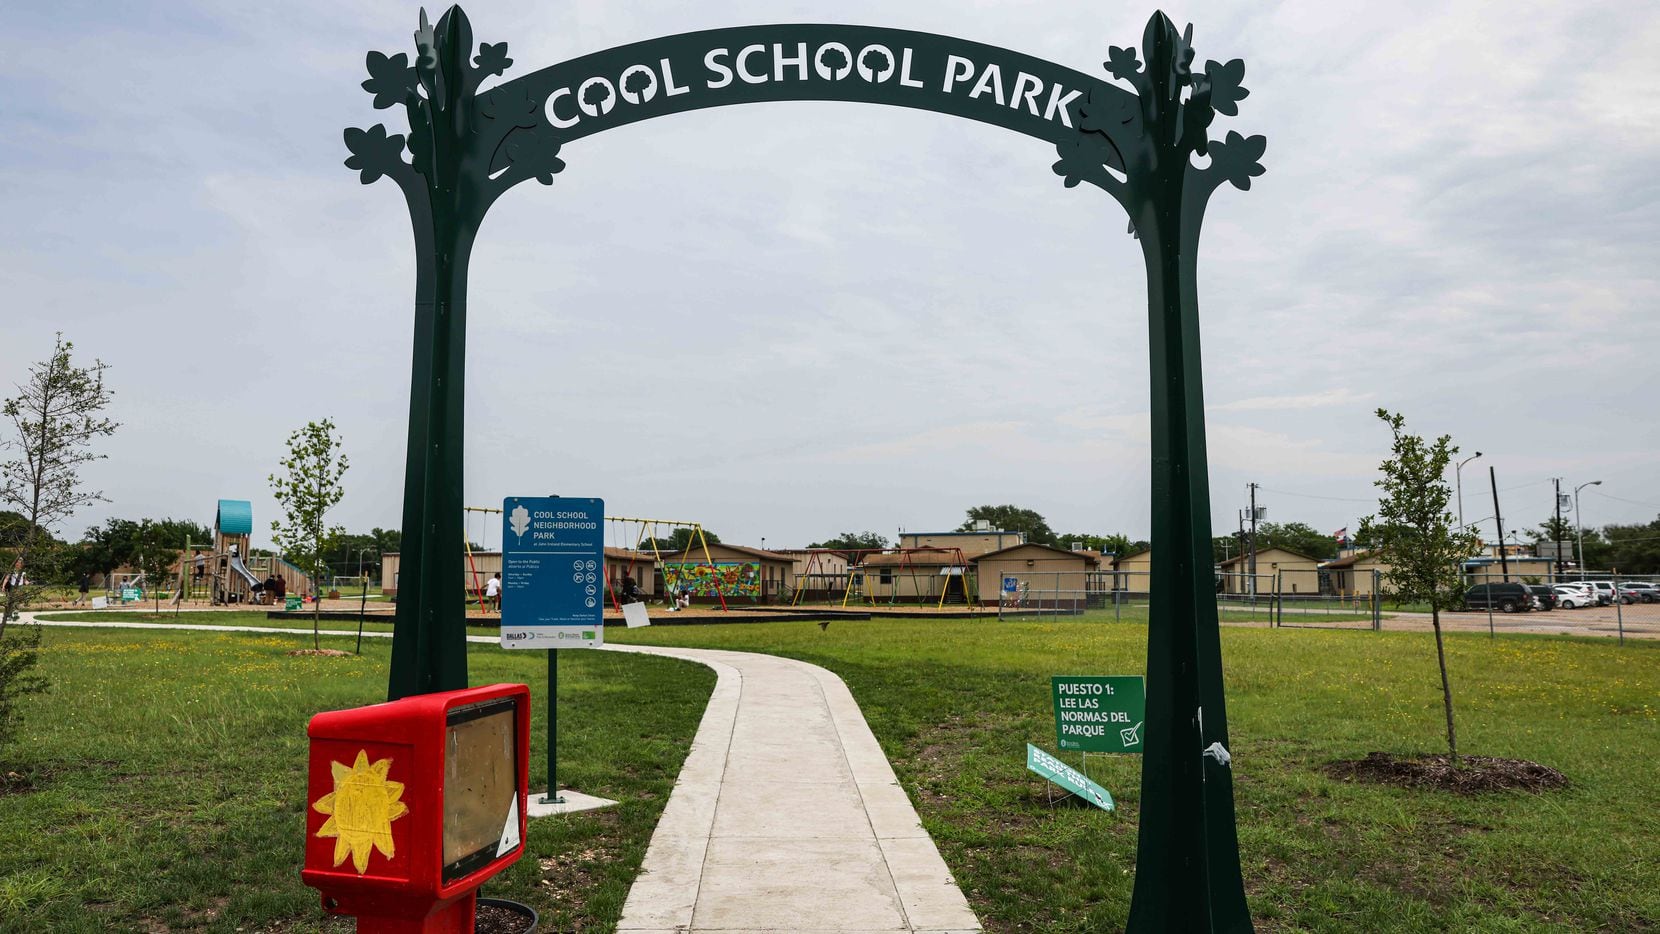 The new "Cool School Park" entrance at John Ireland Elementary in southeast Dallas welcomes...